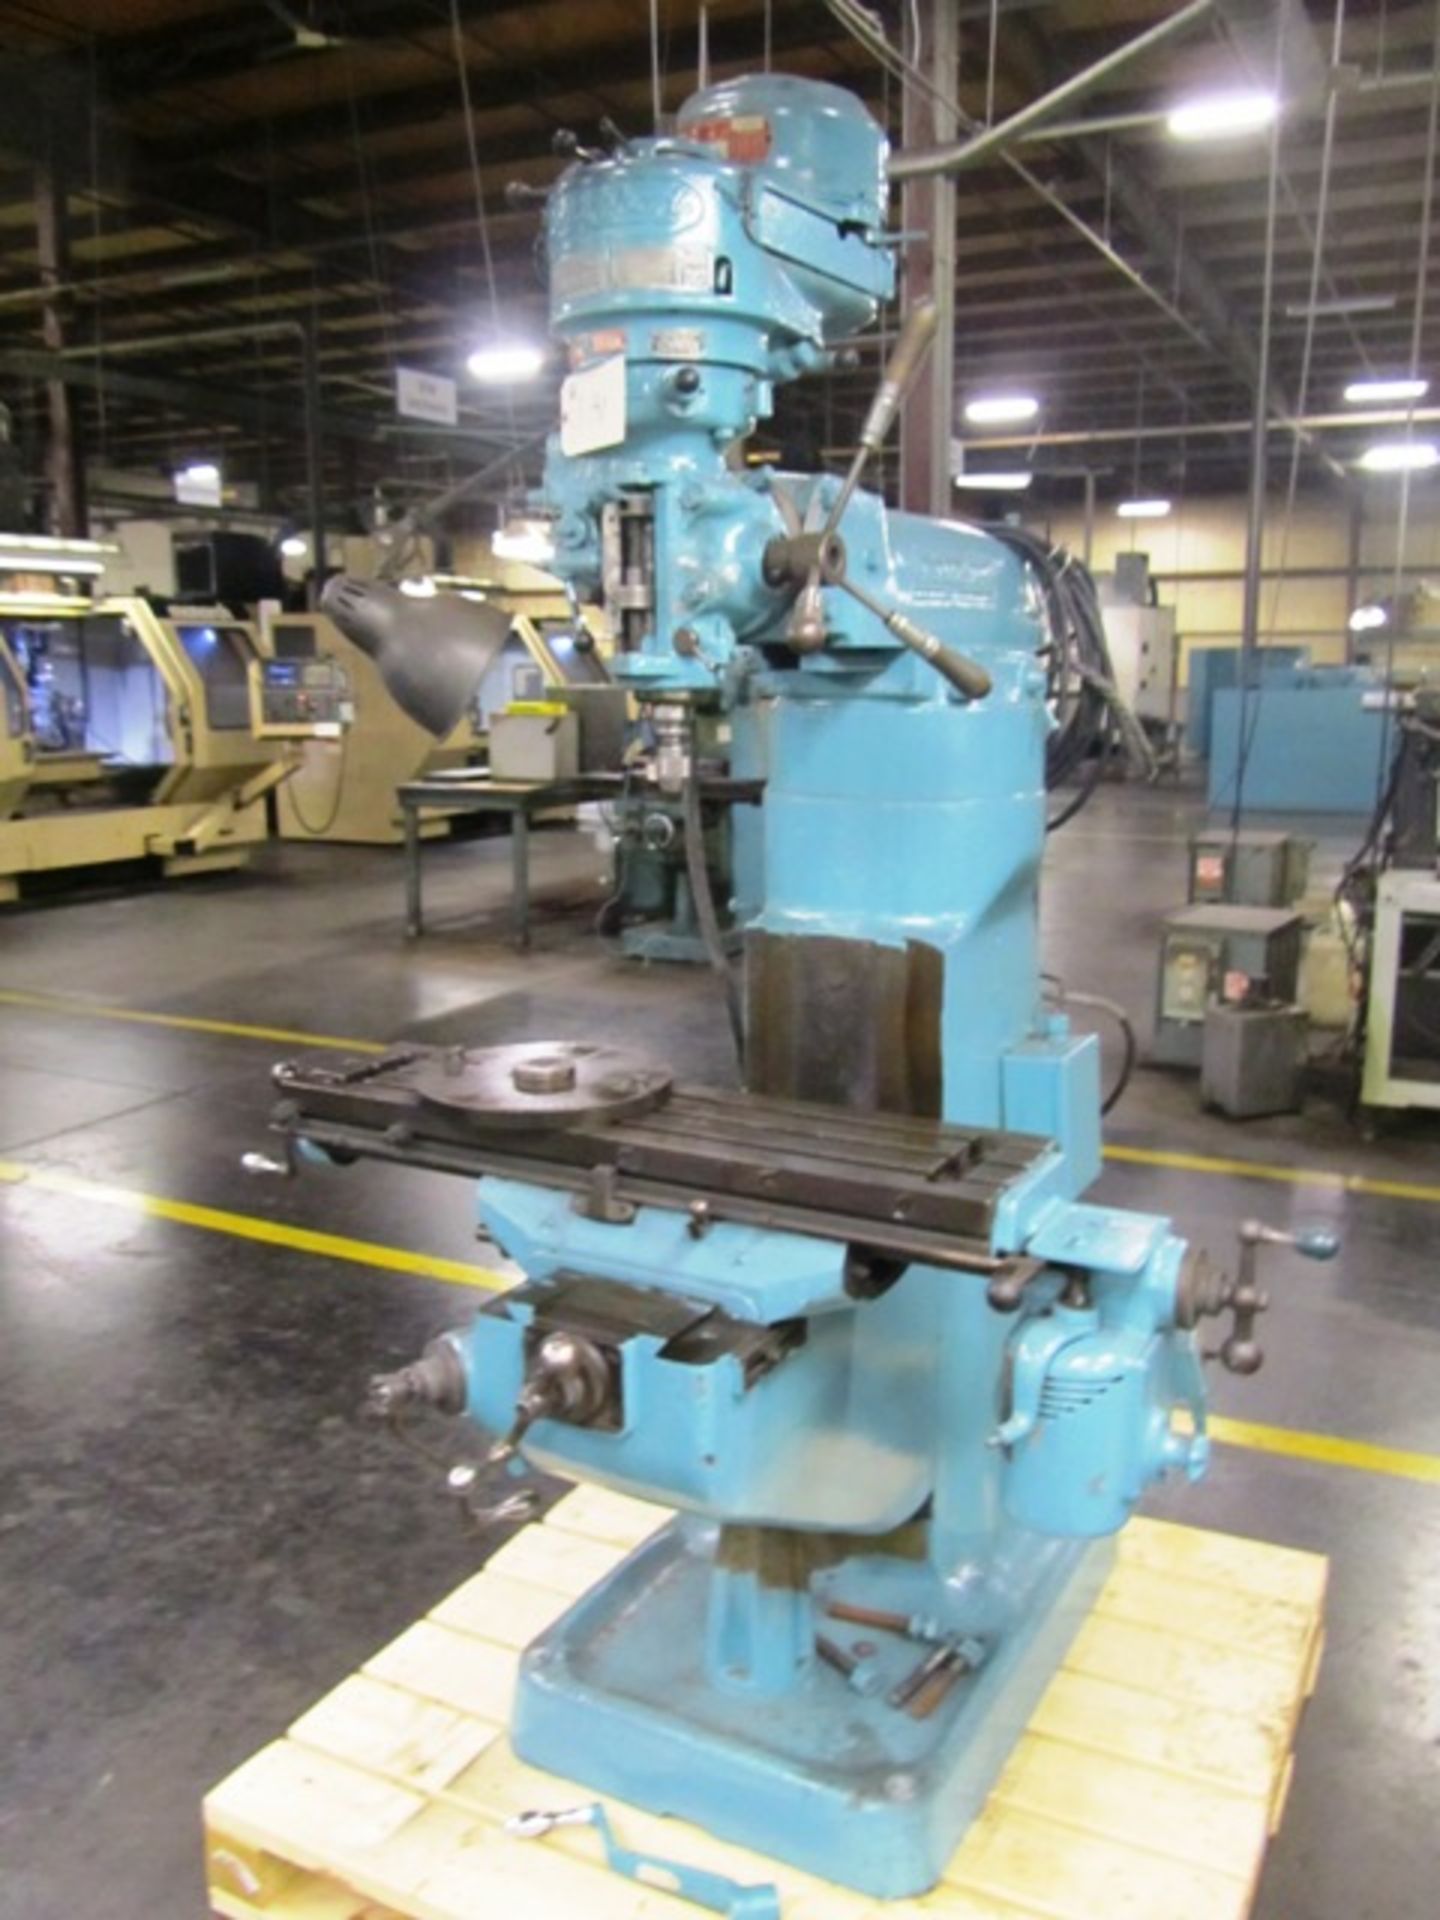 Bridgeport Vertical Milling Machine with 9'' x 36'' Power Feed Table, R-8 Taper, Spindle Speeds to